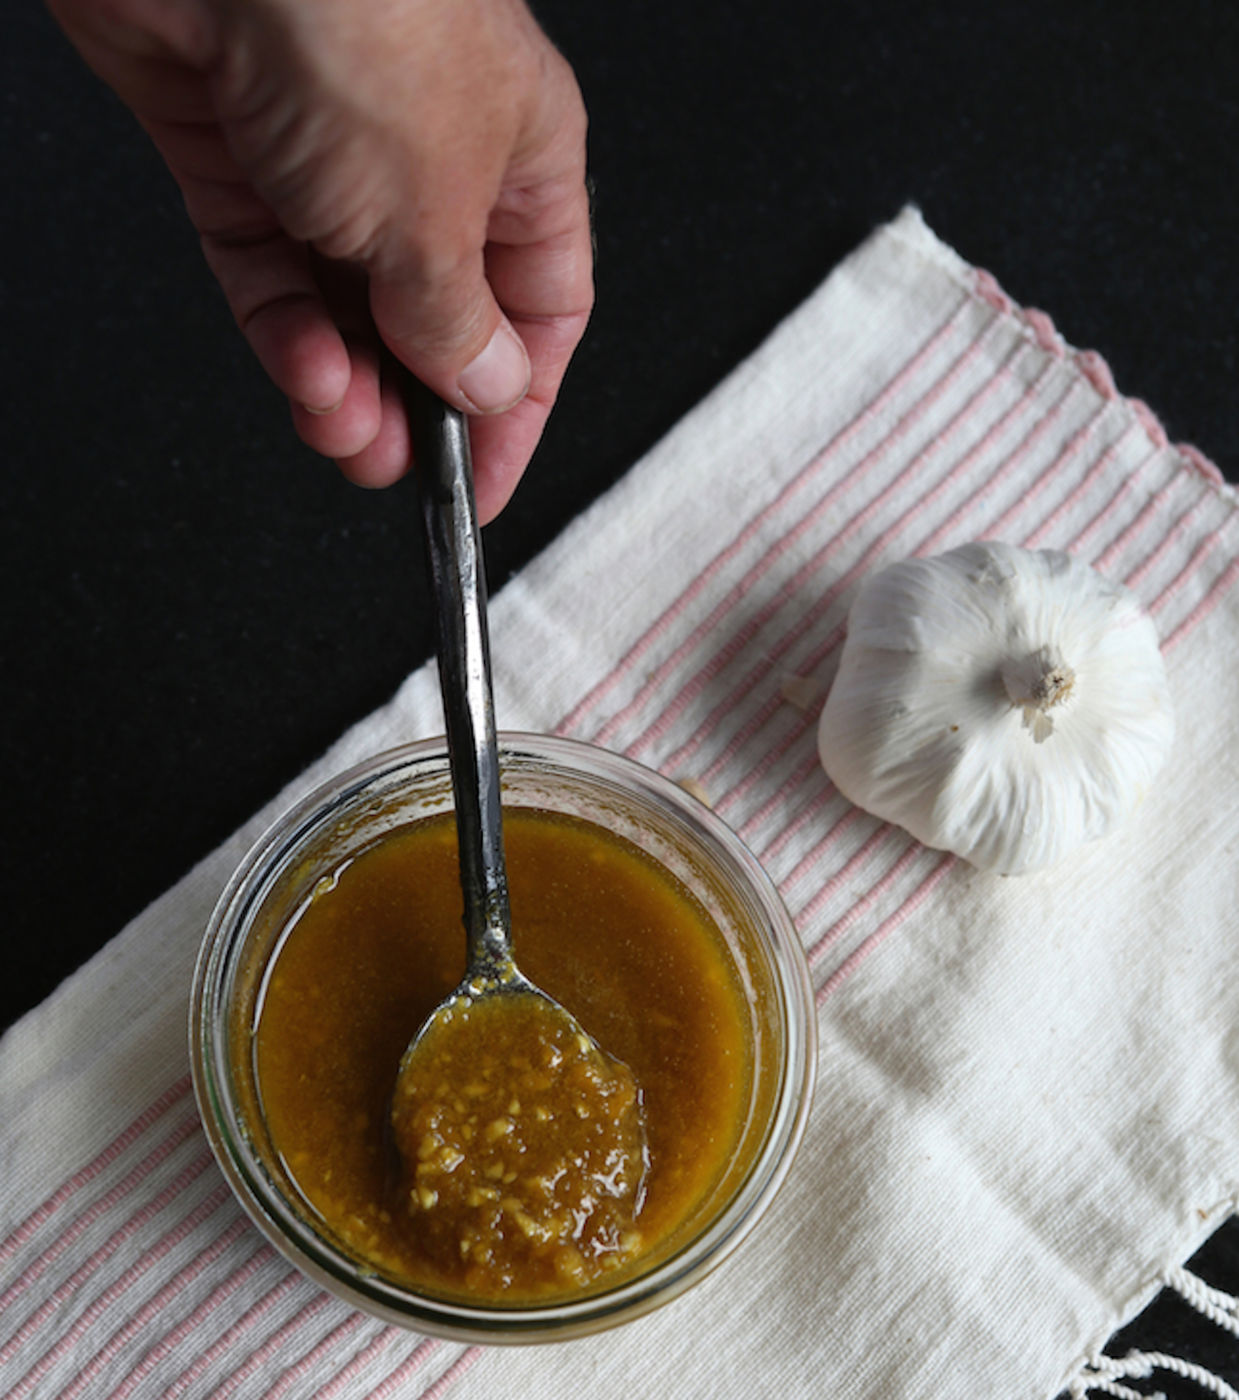 Hand holding spoon dipped in medicinal garlic sauce.